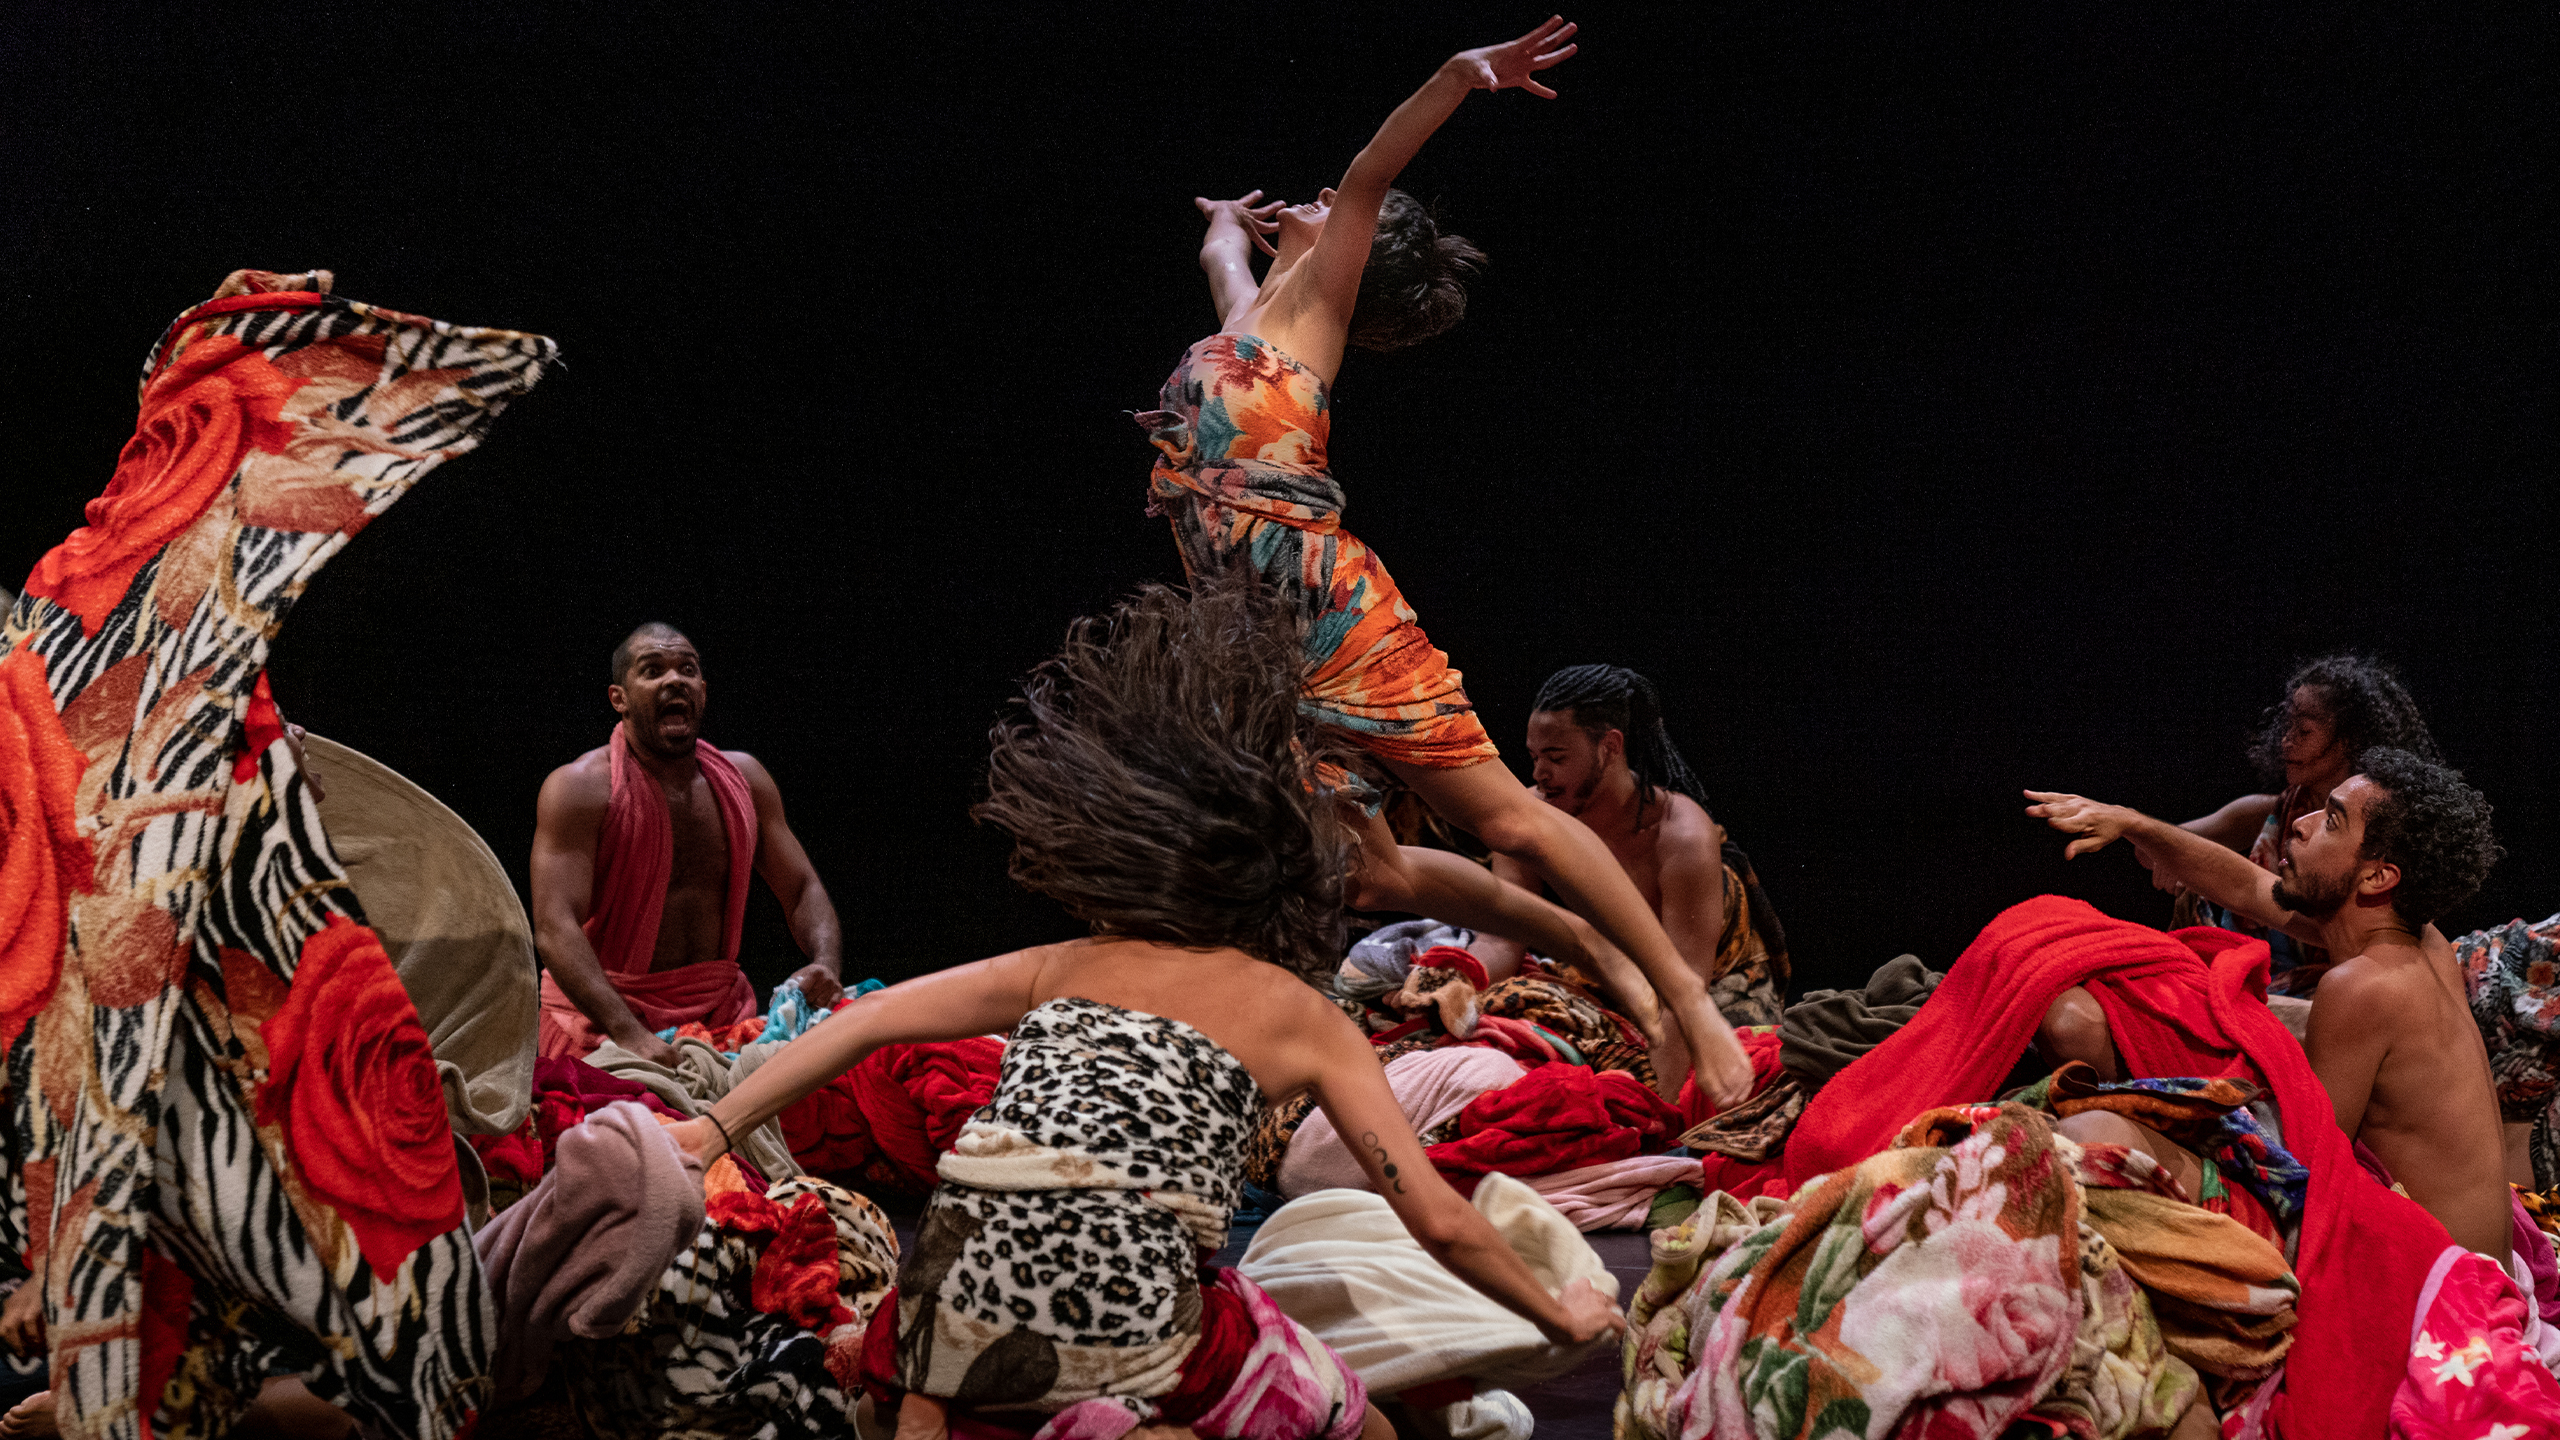 A group of Brazilian dancers, men and women, wear clothes with red and animal print patterns. They are on stage and a female dancer is mid-air as if just thrown by the male dancers.